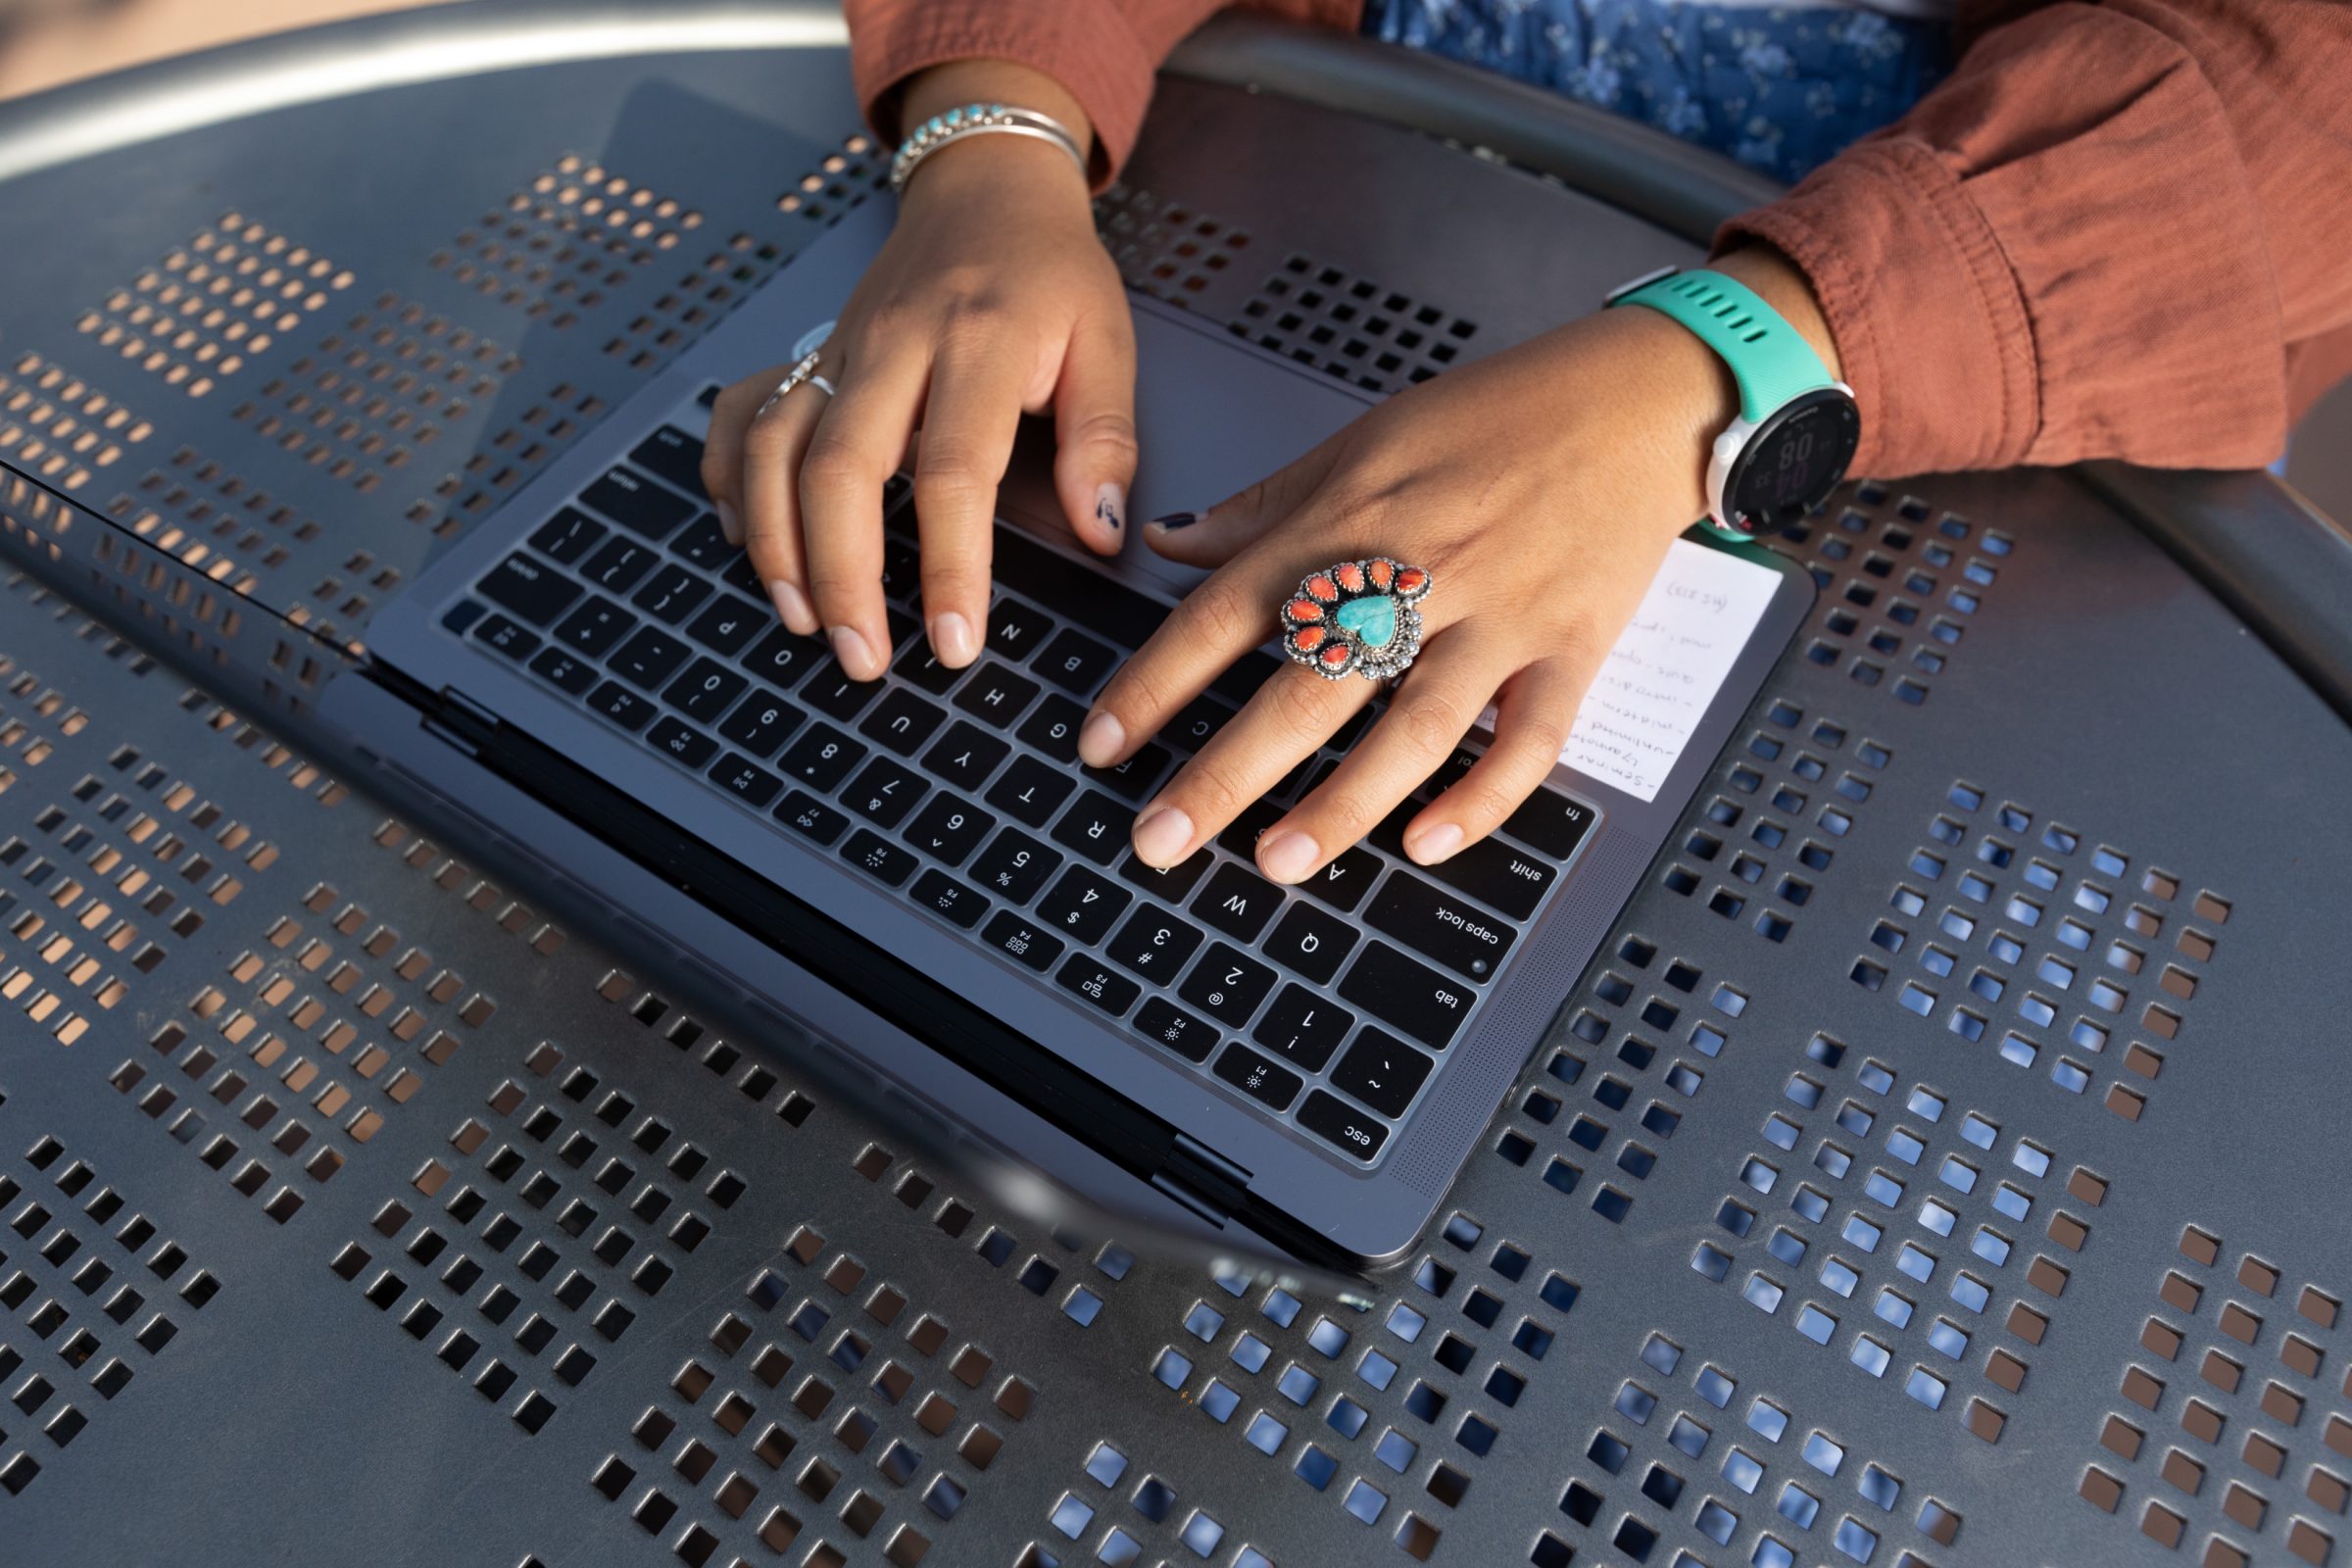 Top-down view of somebody's hands typing on a laptop.